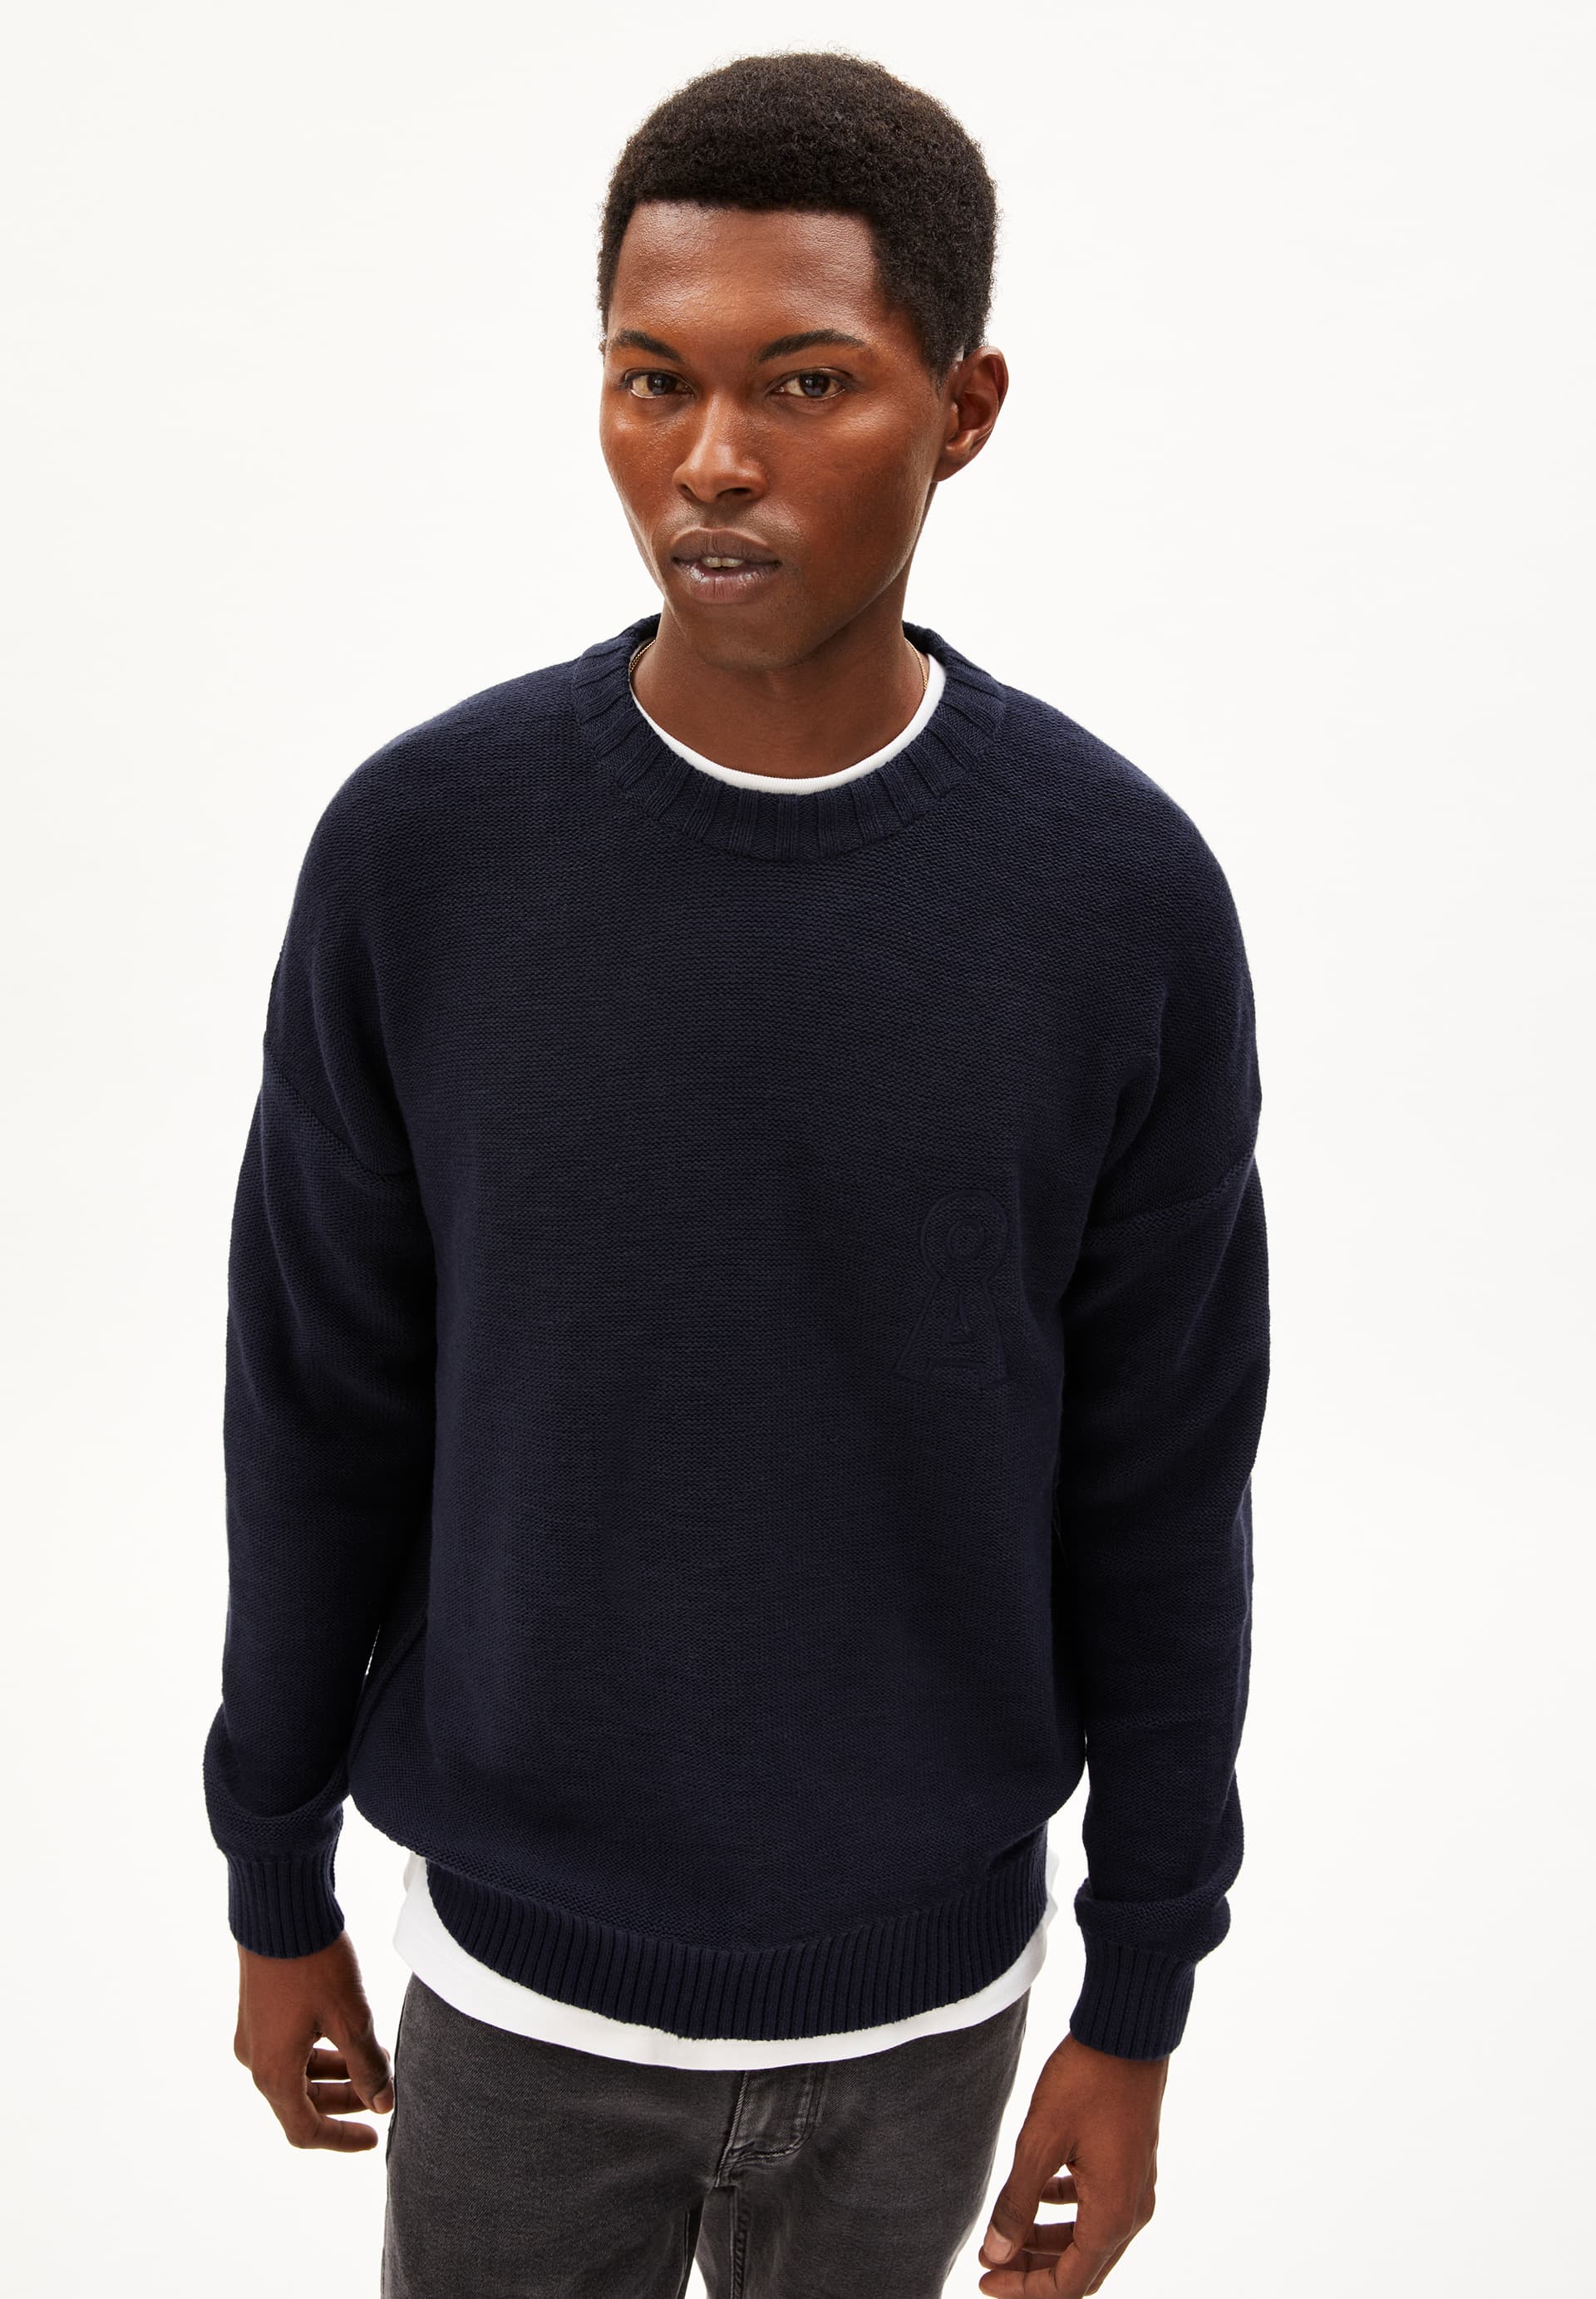 EMAANUELO Sweater Relaxed Fit made of Organic Cotton